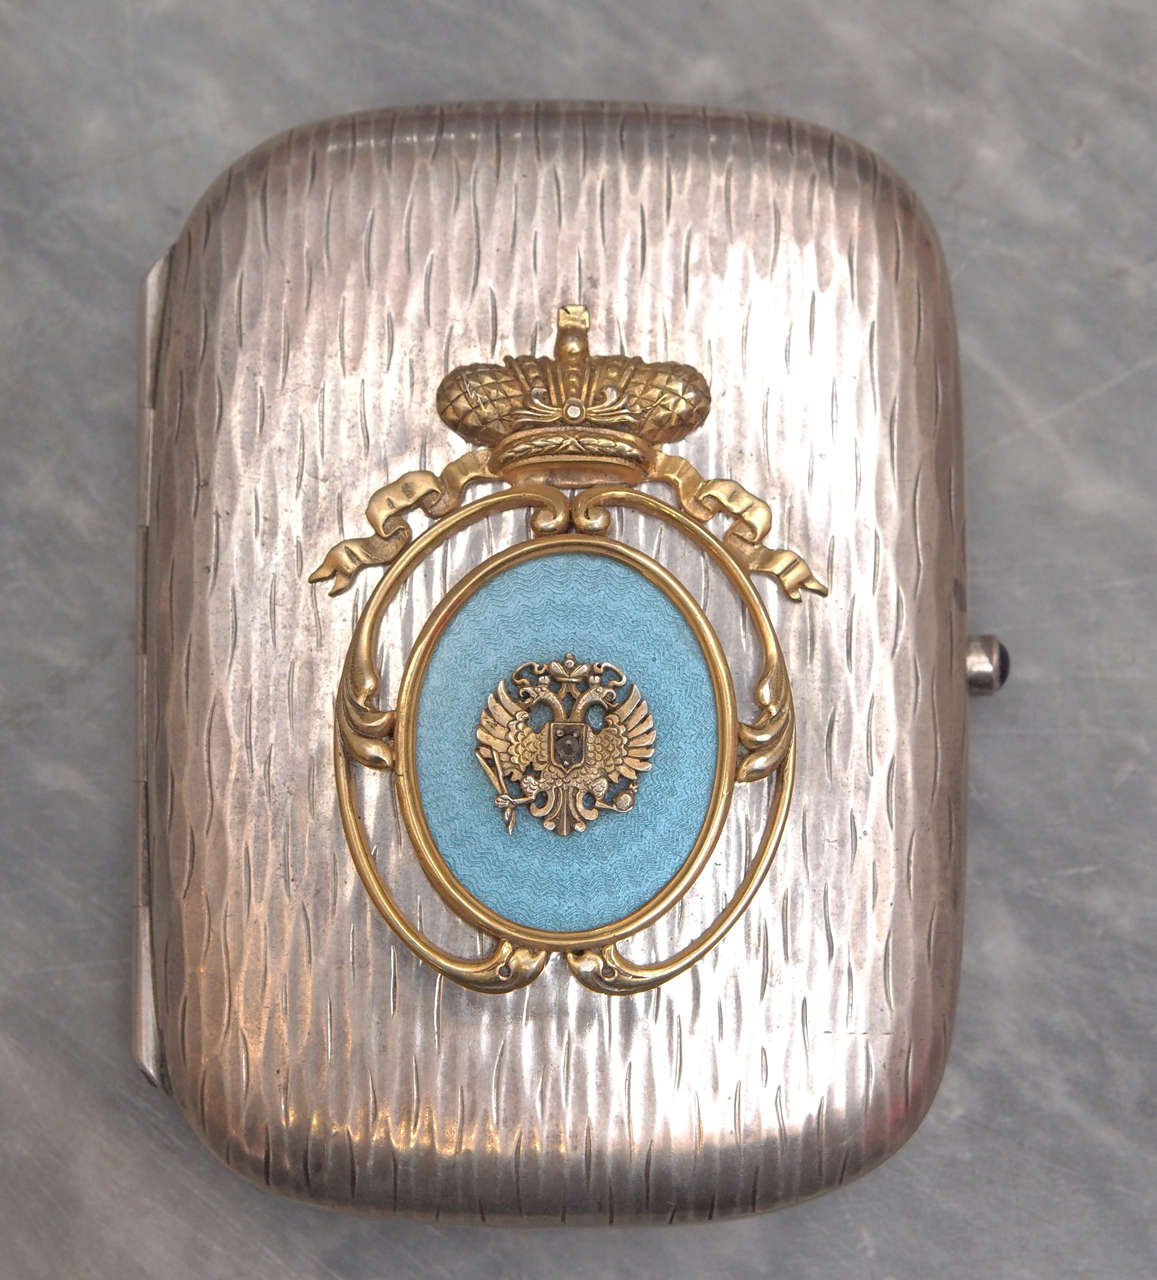 Case with blue guilloche enamel appliqué crowned crew with double headed eagle. Holds 88 silver purity, town and work master marks.